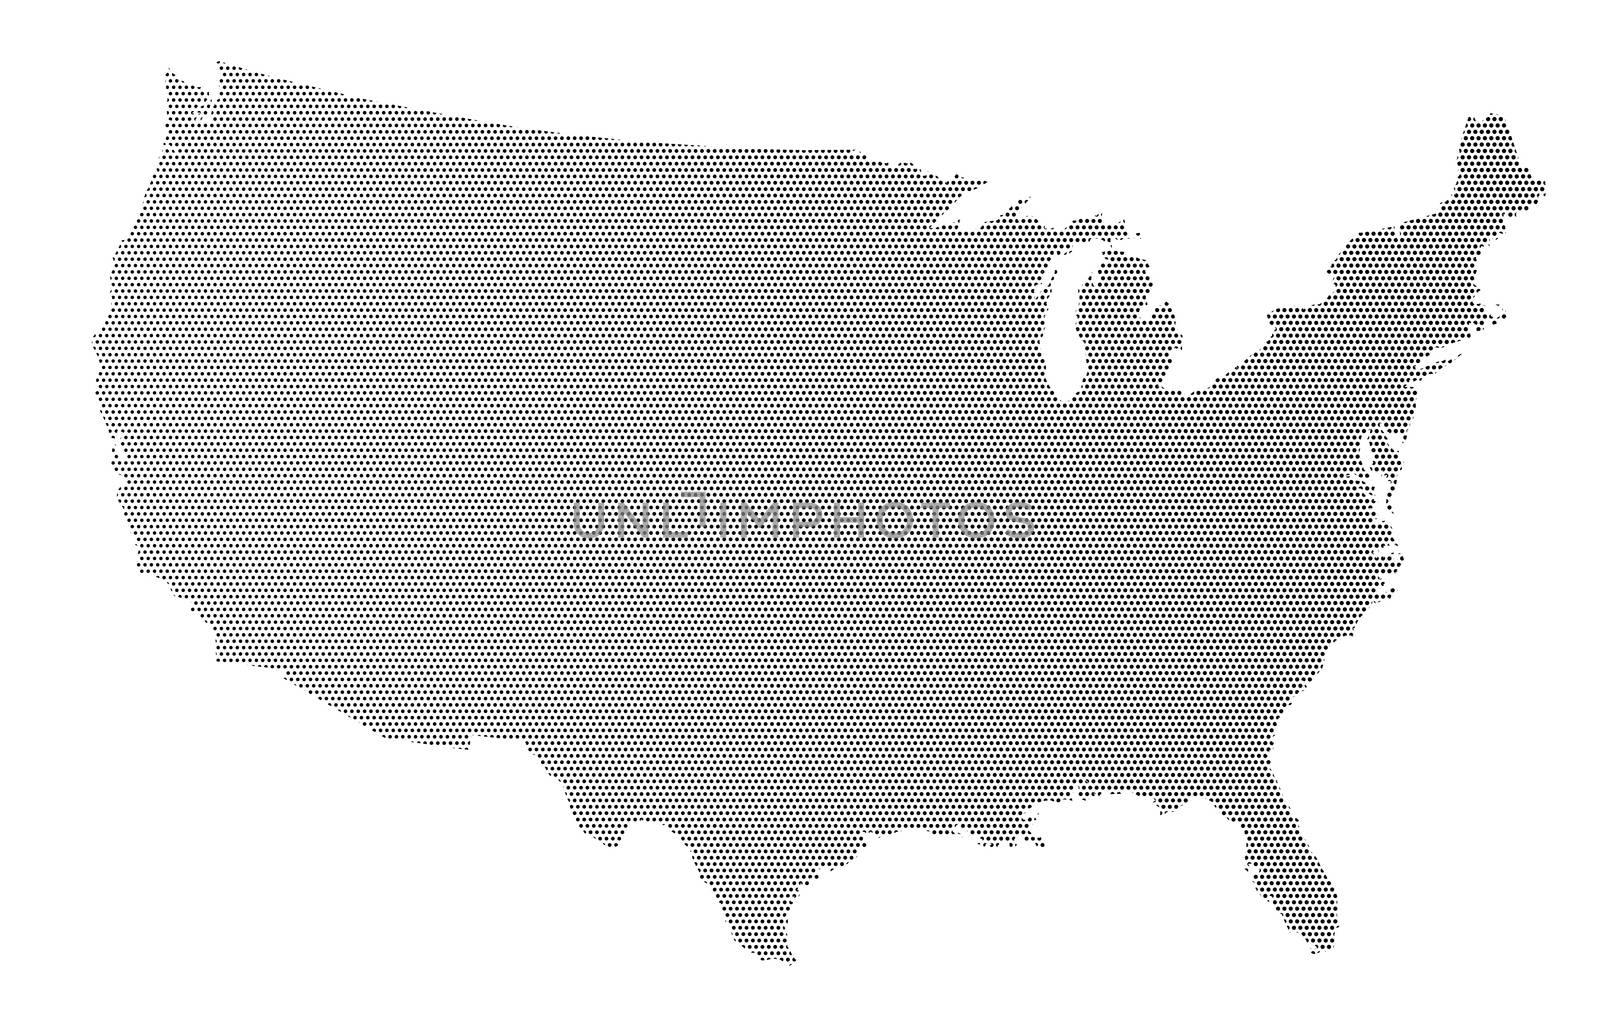 A halftone silhouette map of The United States of America over a white background